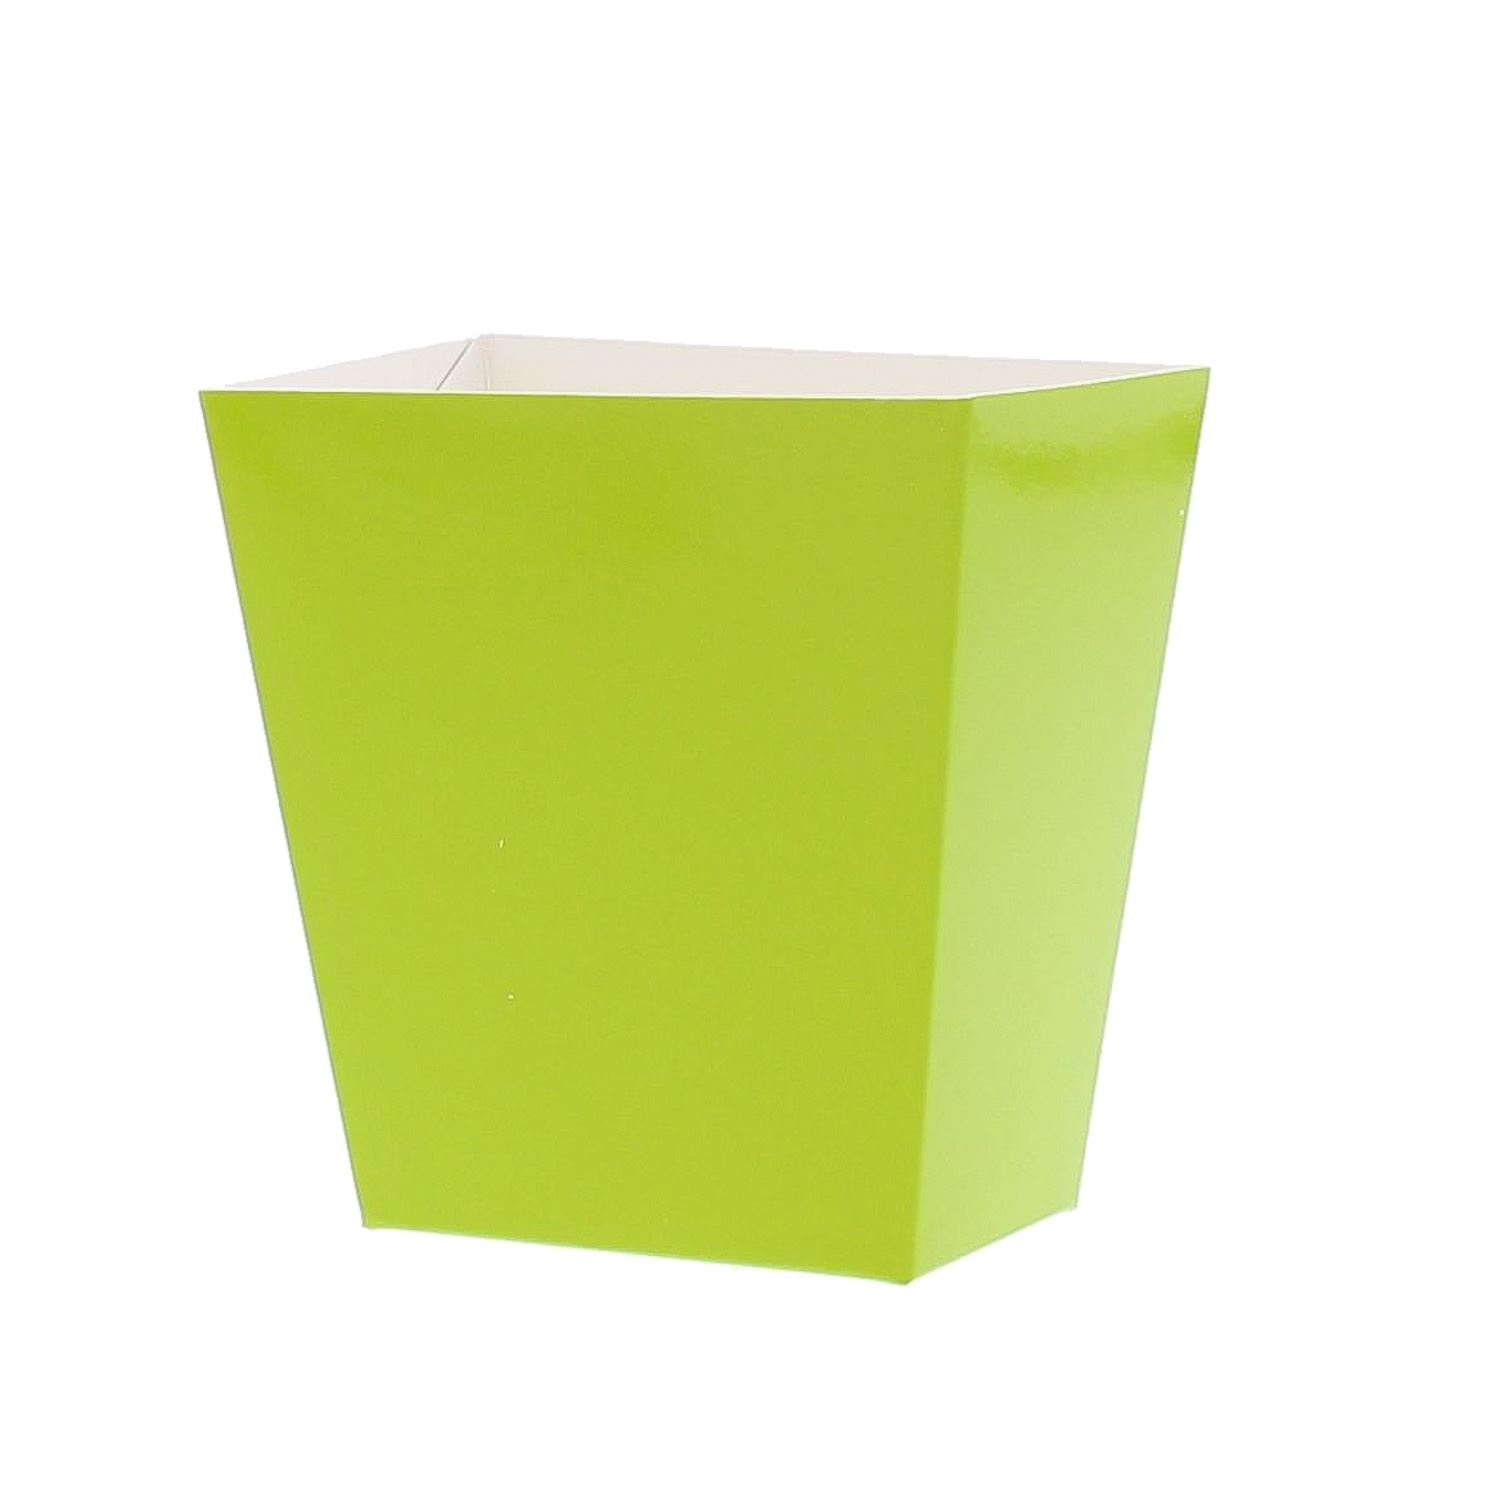 Conical tray high green - 2 sizes - 78*48*80 mm and 96*61*80 mm - 50 pieces